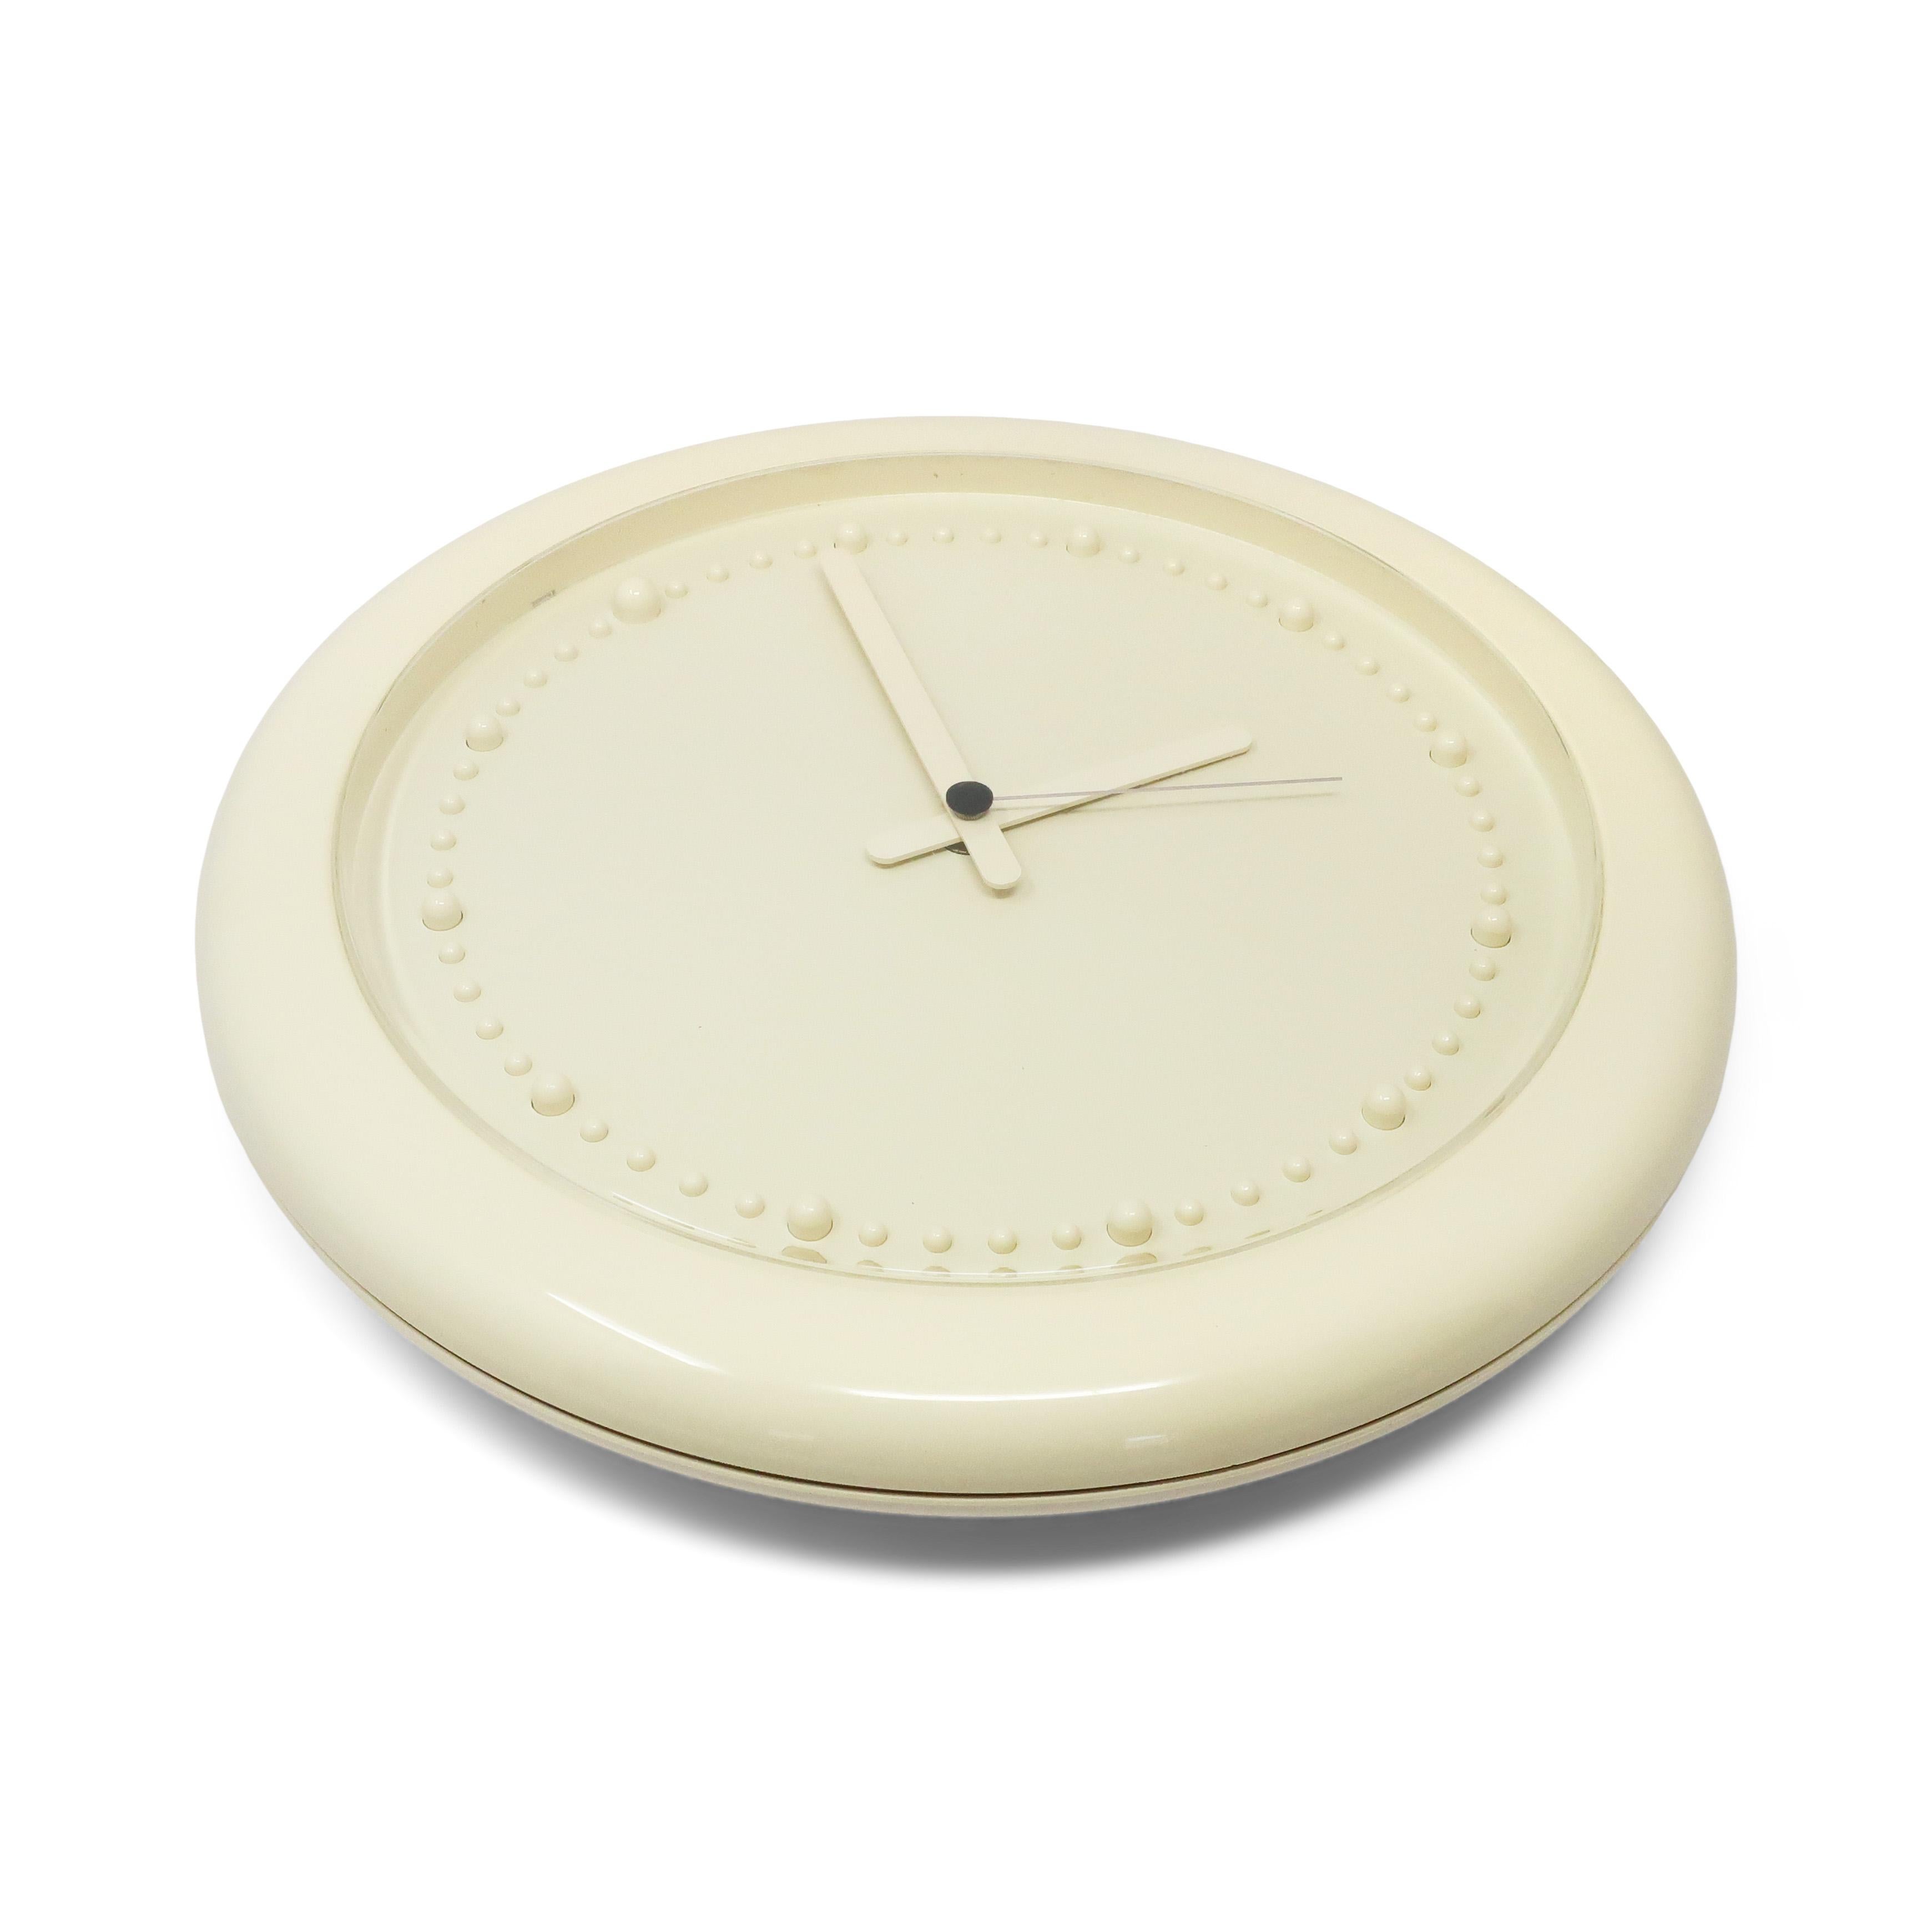 Designed by Raul Barbieri and Giorgio Marianelli for Rexite in 1981, this Zero 980 wall clock has a striking white on white colorway. White plastic case, white hands, and raised white plastic bumps for the clock's numbers and a white face. Perfect